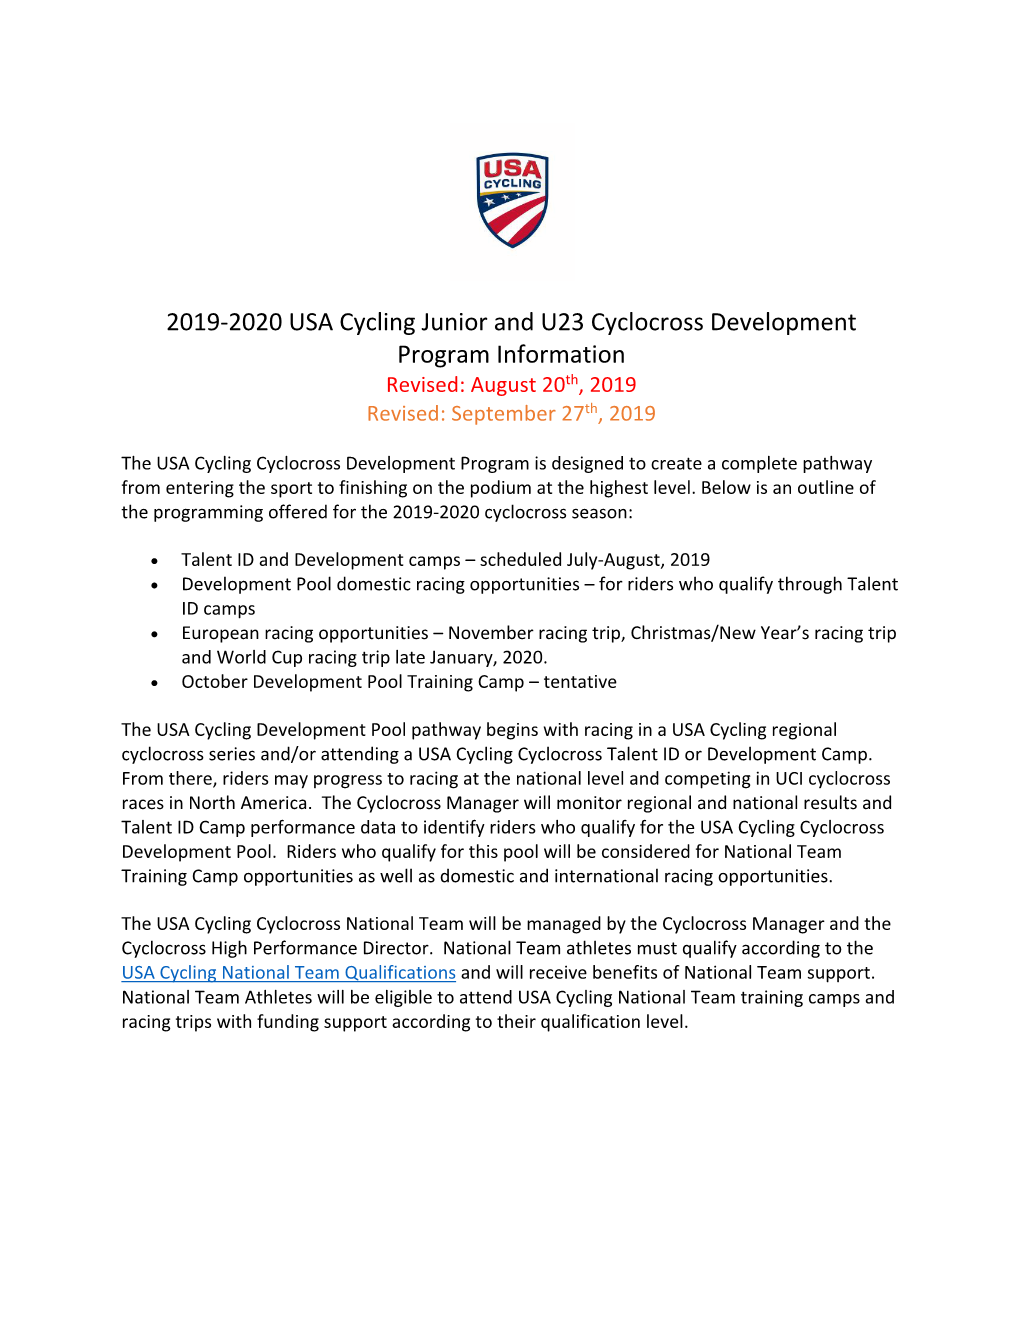 2019-2020 USA Cycling Junior and U23 Cyclocross Development Program Information Revised: August 20Th, 2019 Revised: September 27Th, 2019